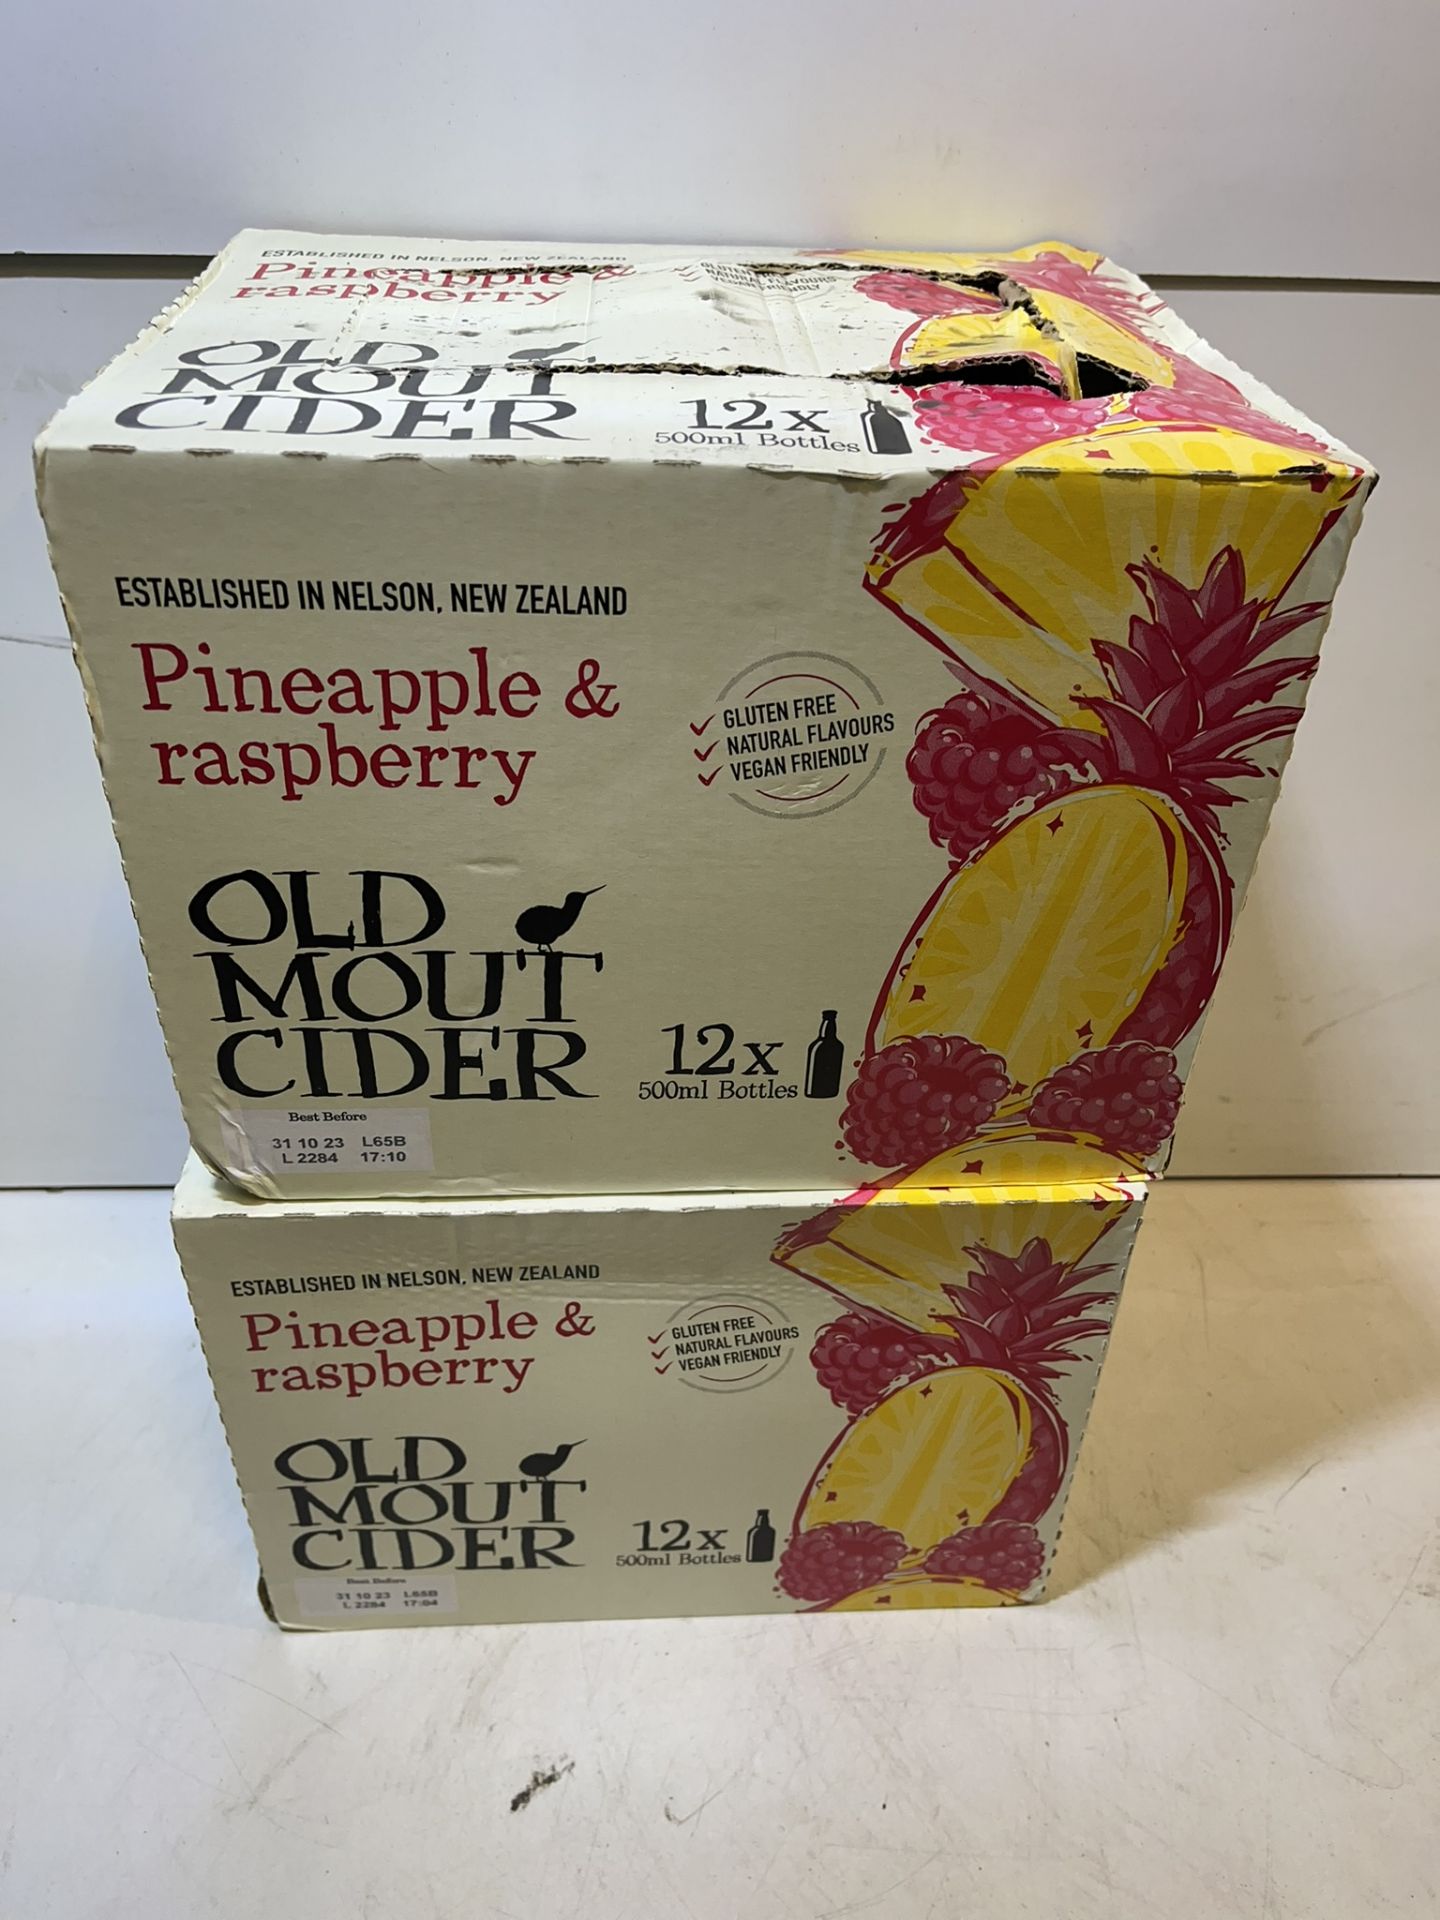 24 x 500ML Bottles Of Pinapple And Rasberry Old Mount Cider